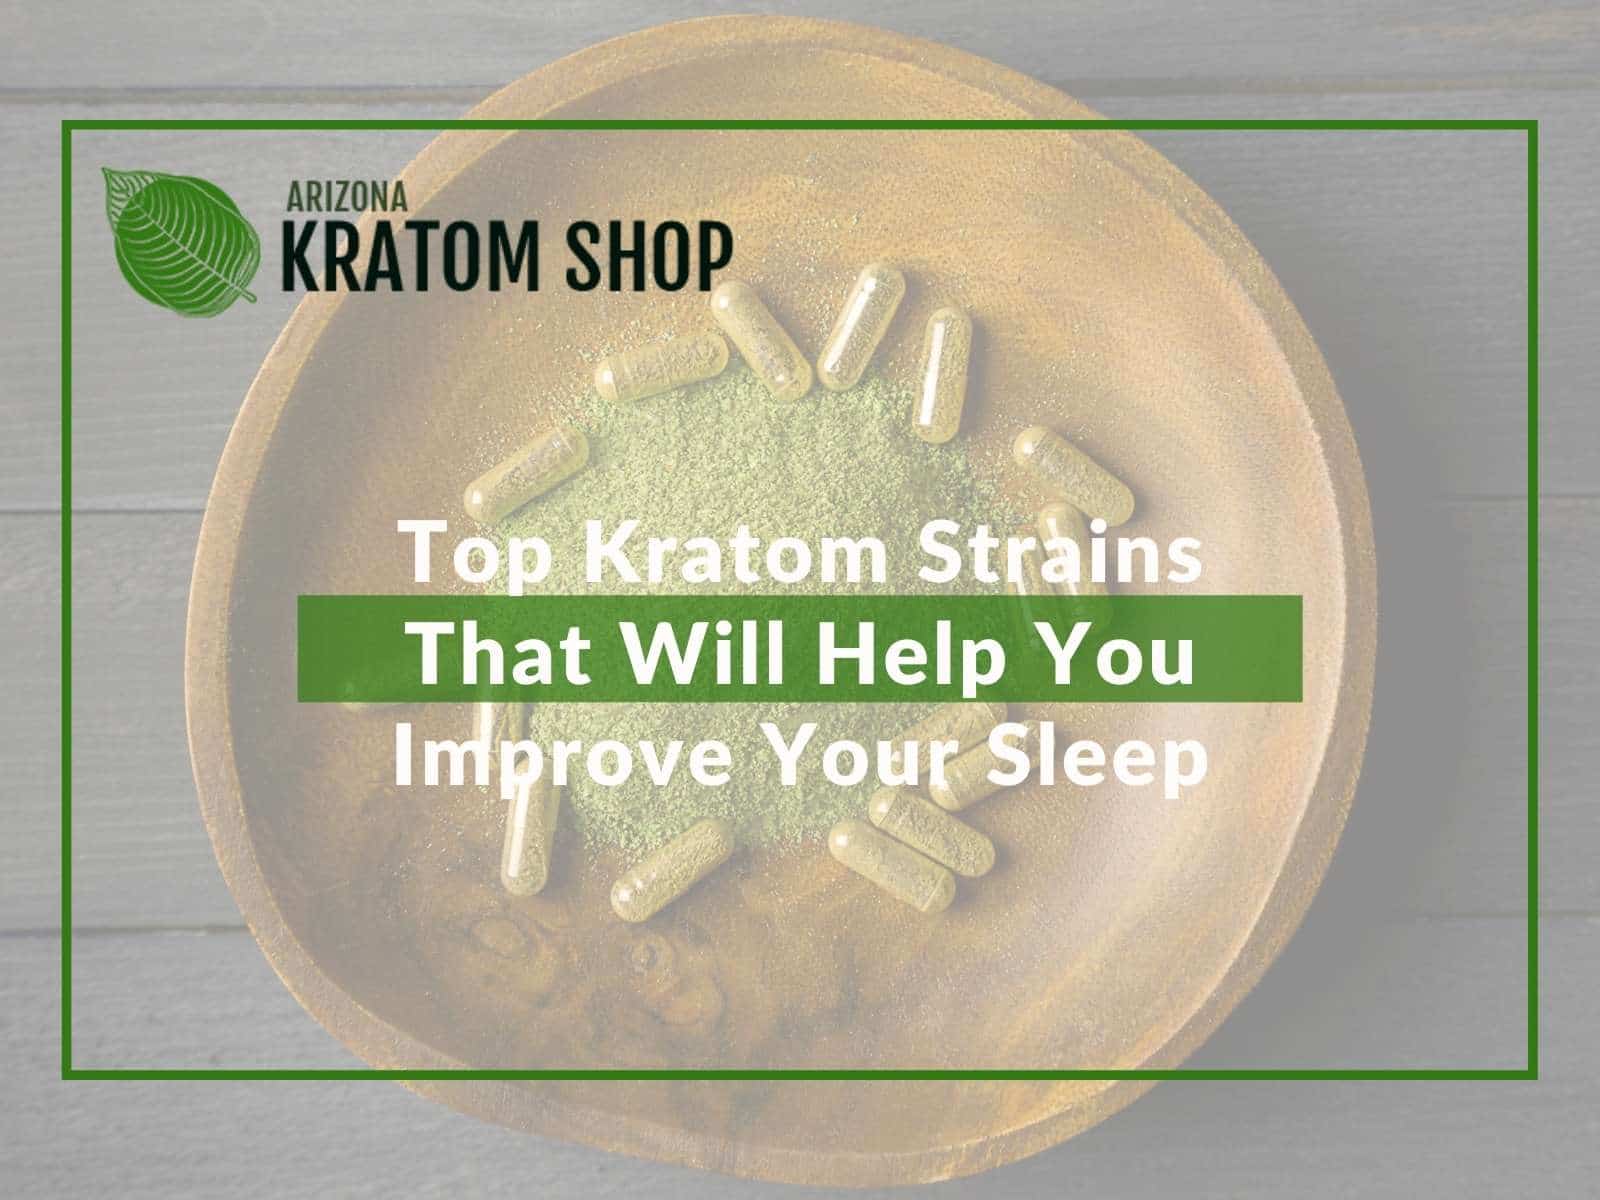 Top Kratom Strains That Will Help You Improve Your Sleep